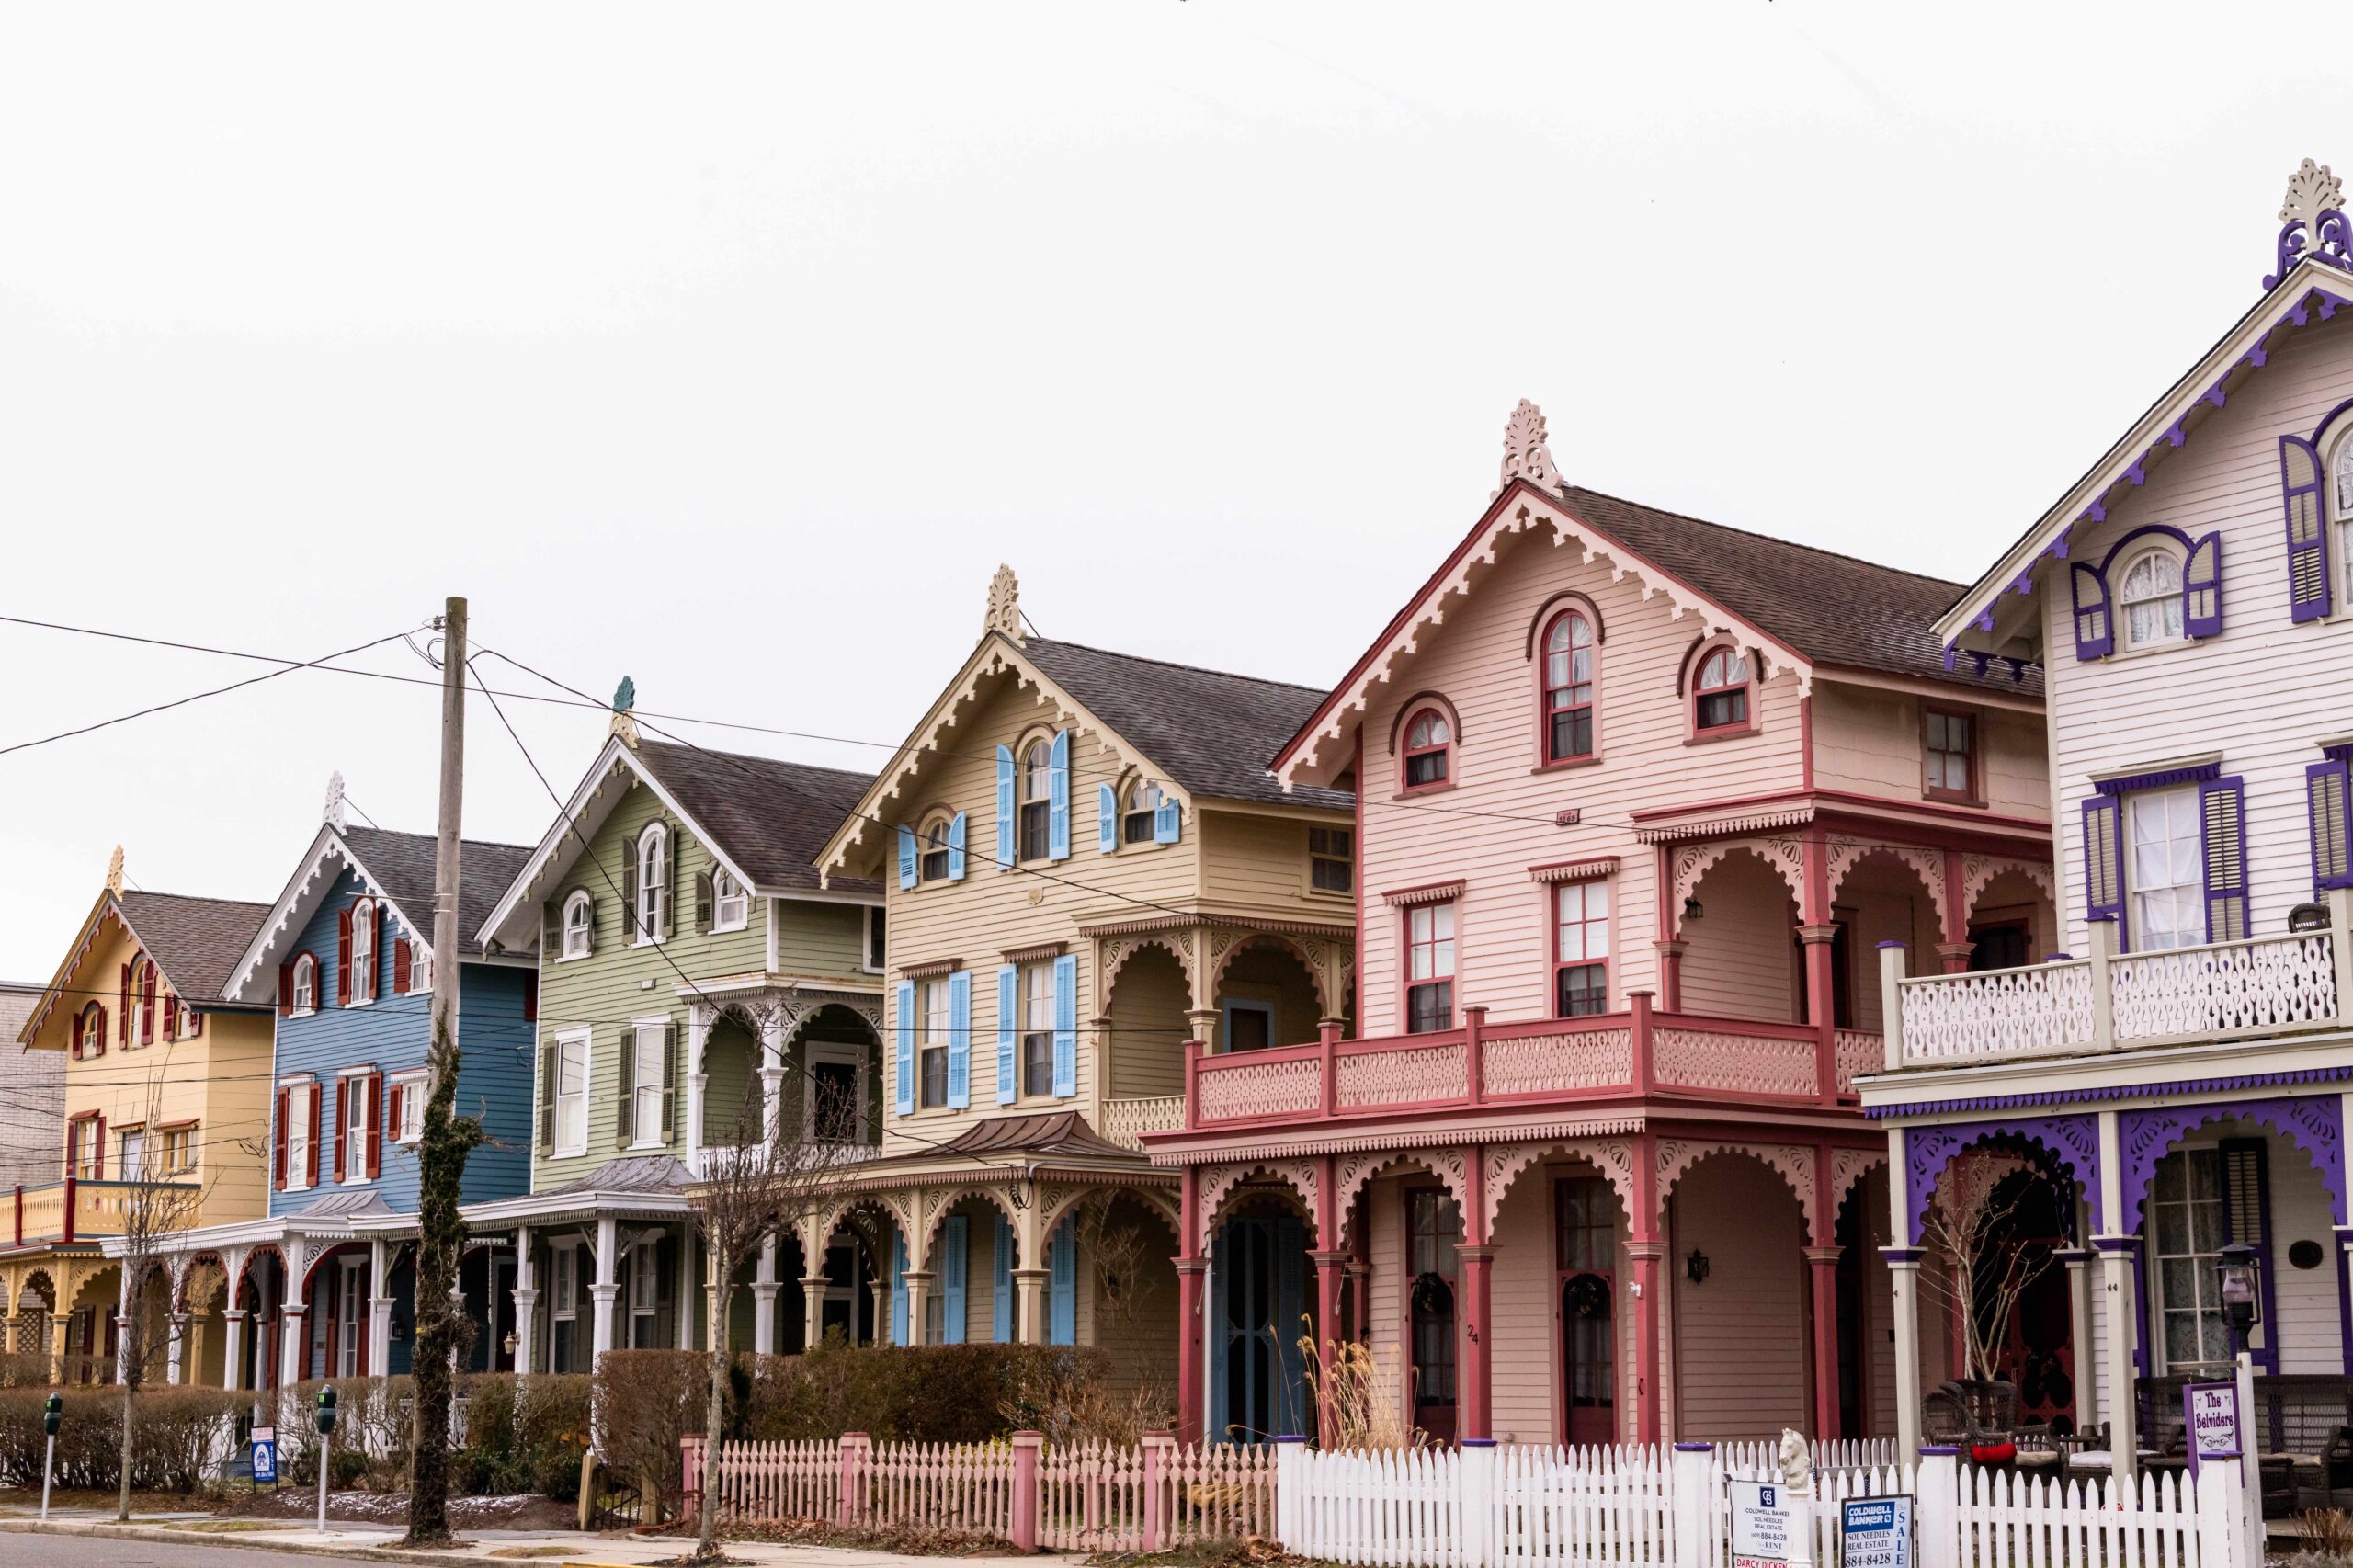 Six colorful Victorian houses in a row (from left to right: yellow, blue, green, tan, pink, purple) on a cloudy day with a gray sky